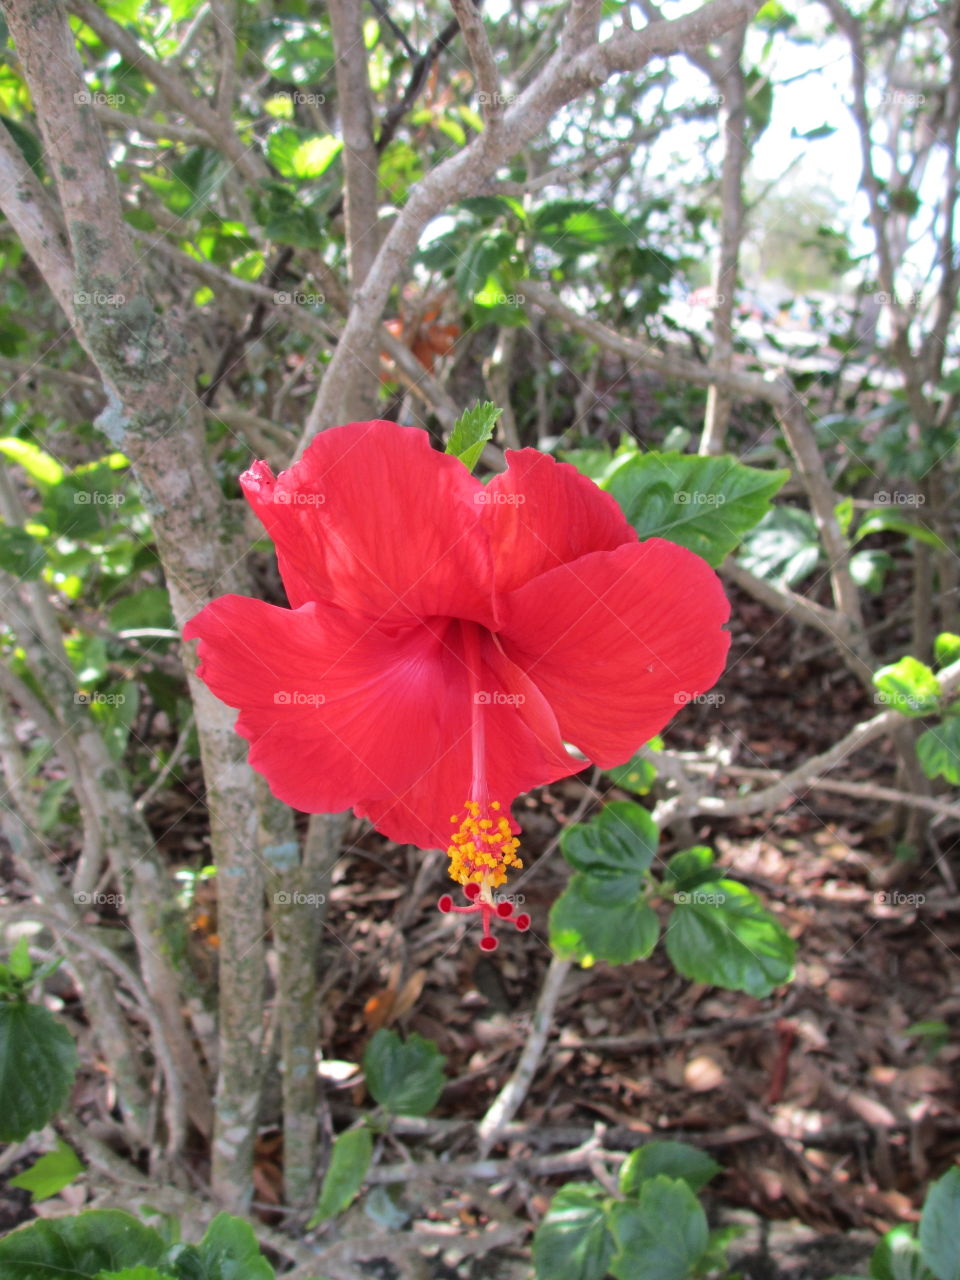 Red Hibiscus Flower. Red Hibiscus flower blooming on an aging bush